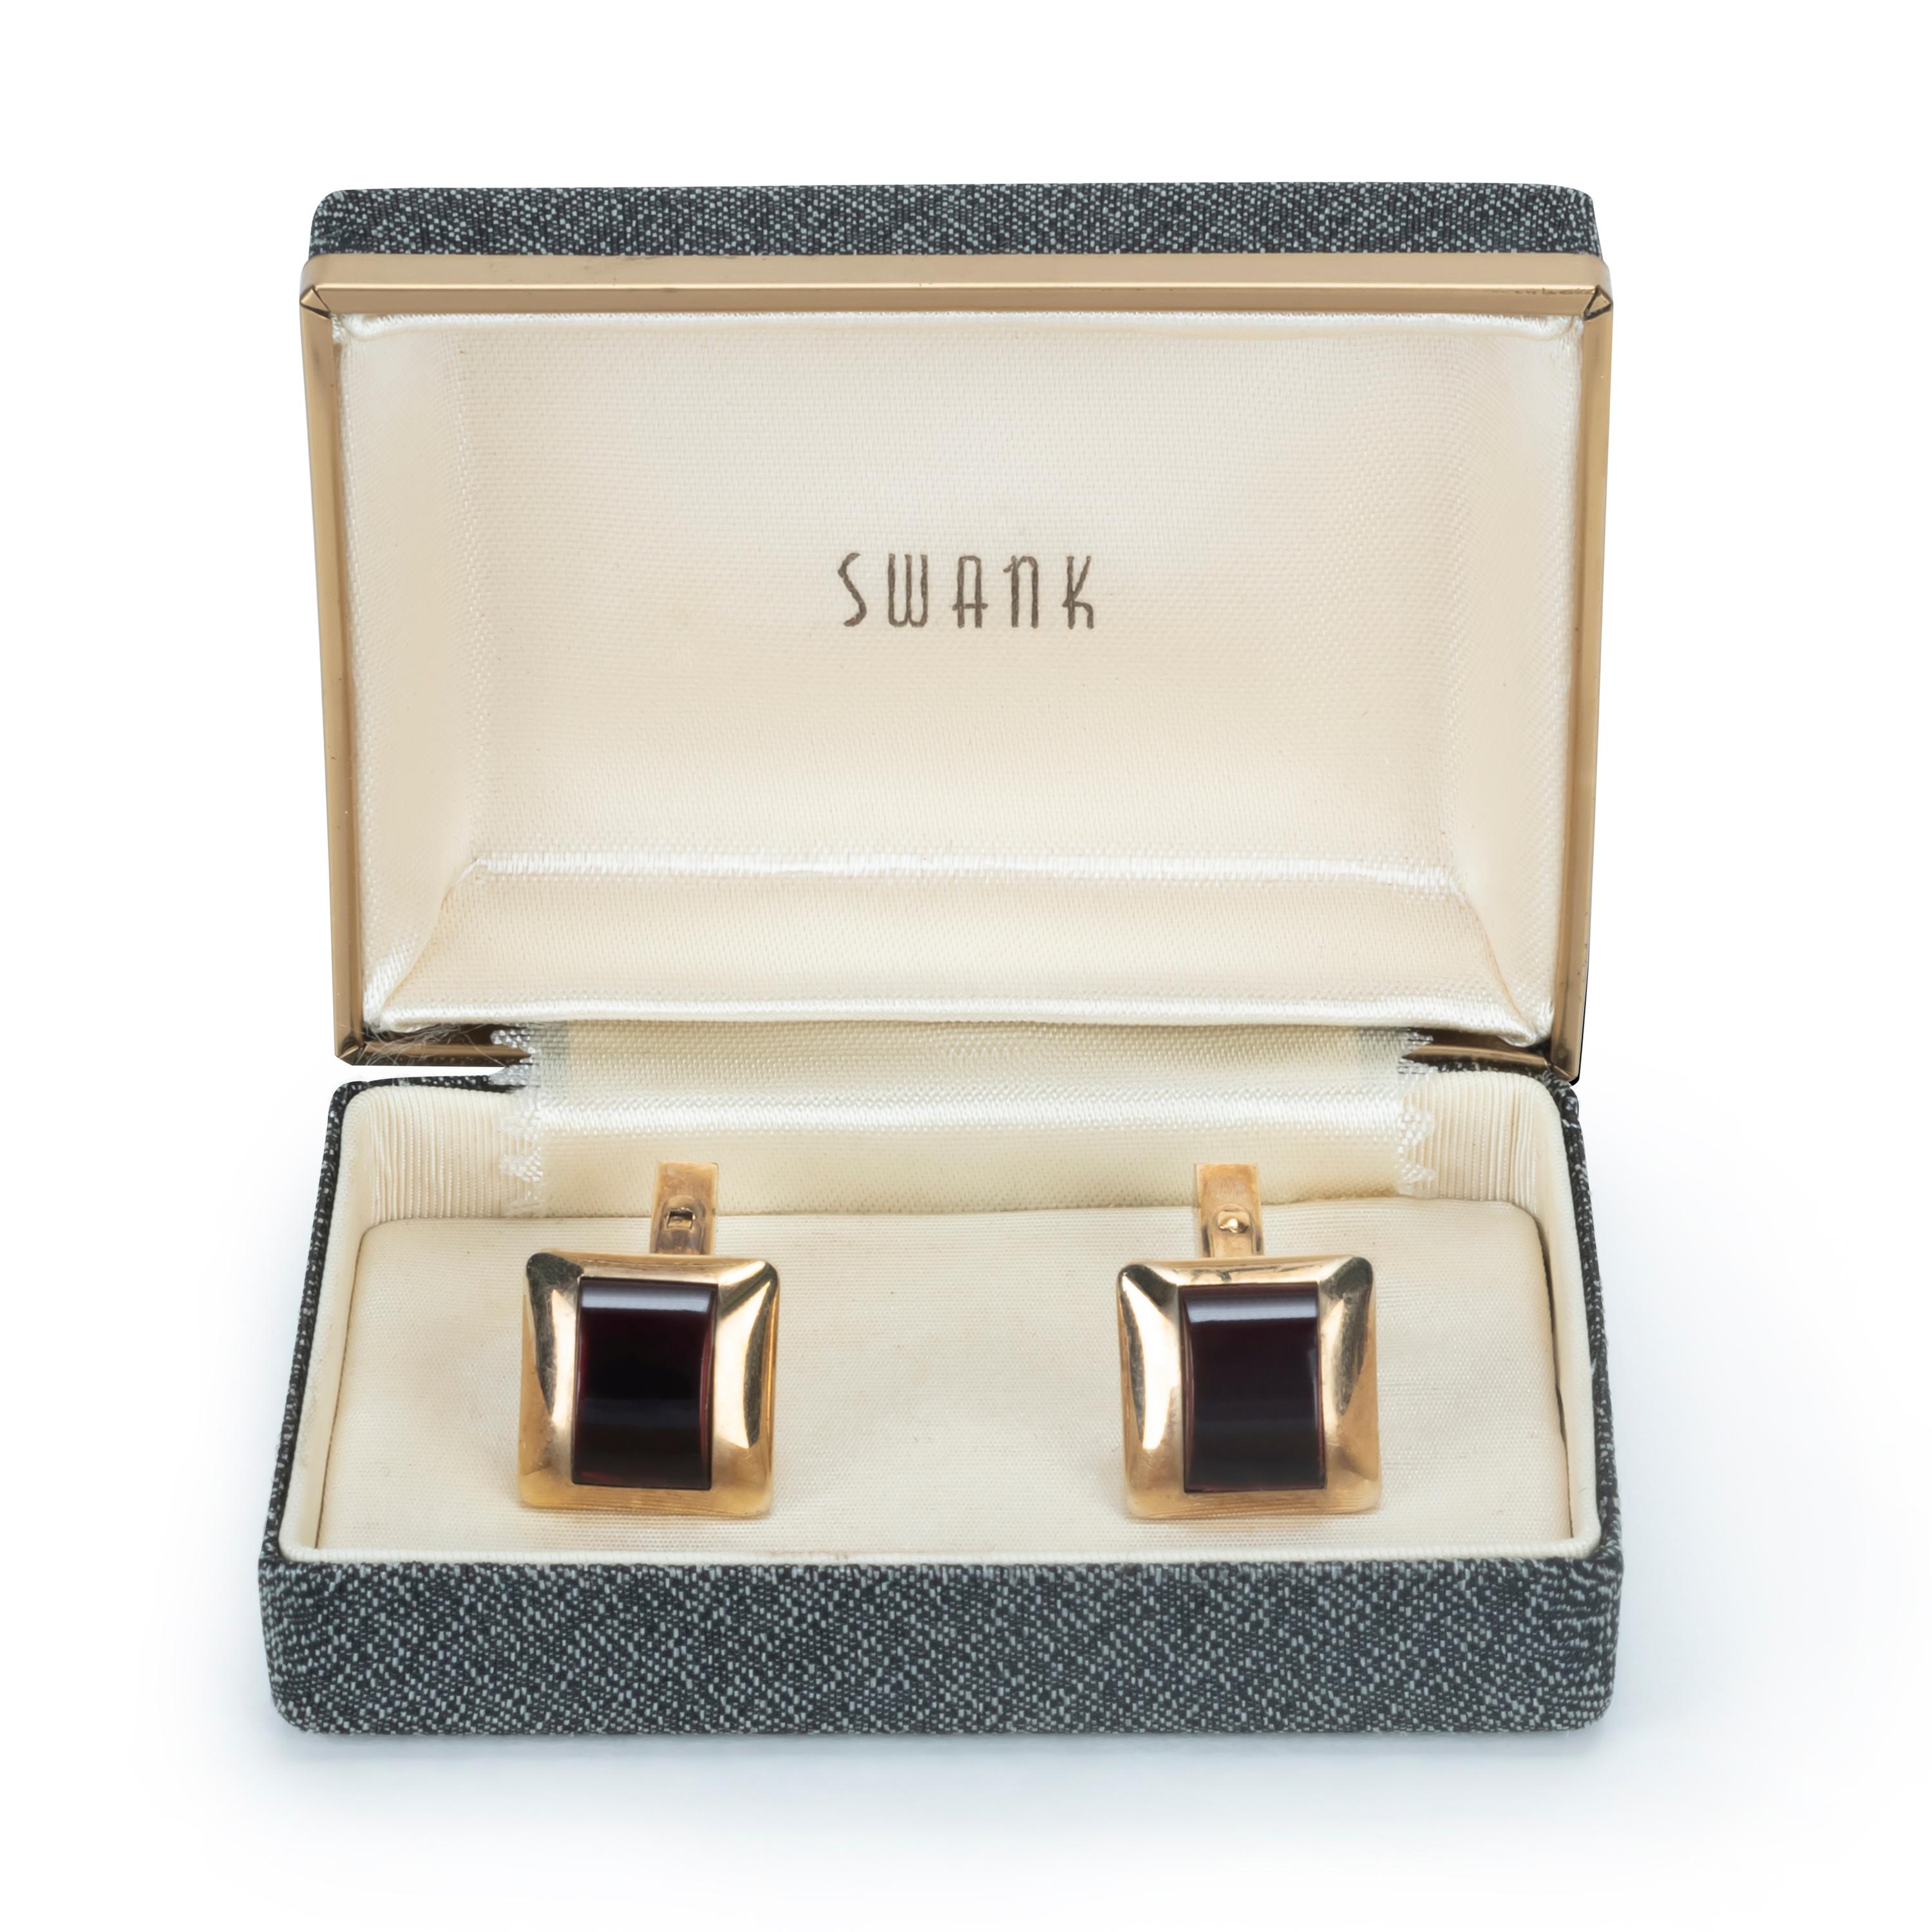 Vintage Swank 10K Gold Plated Cufflinks Dark Ruby Red Lucite Stones in a Modernist Box
The Gold and Red cufflinks are classic chic for black tie, cocktail attire. 
Can be worn unisex. 
What is unique about this pair is the mint condition there are